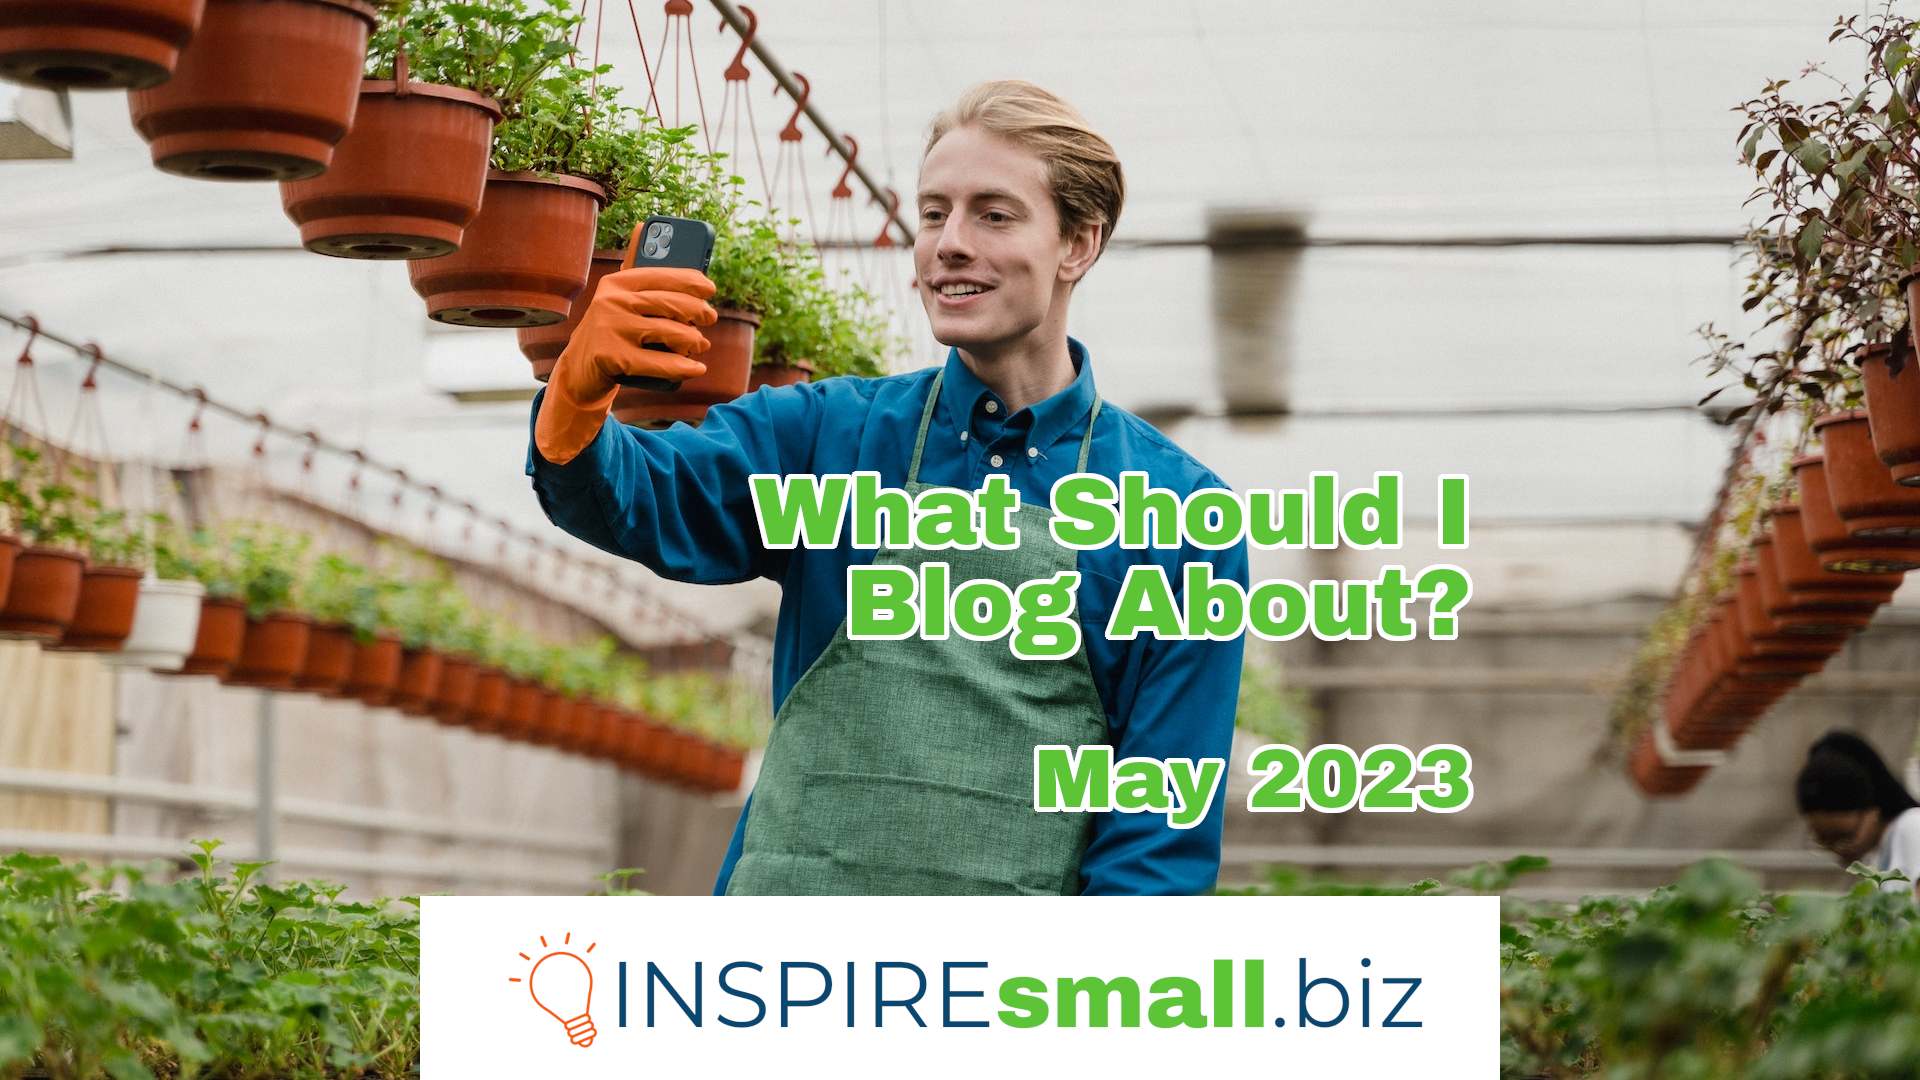 What Should I Blog About? May 2023, from INSPIREsmall.biz